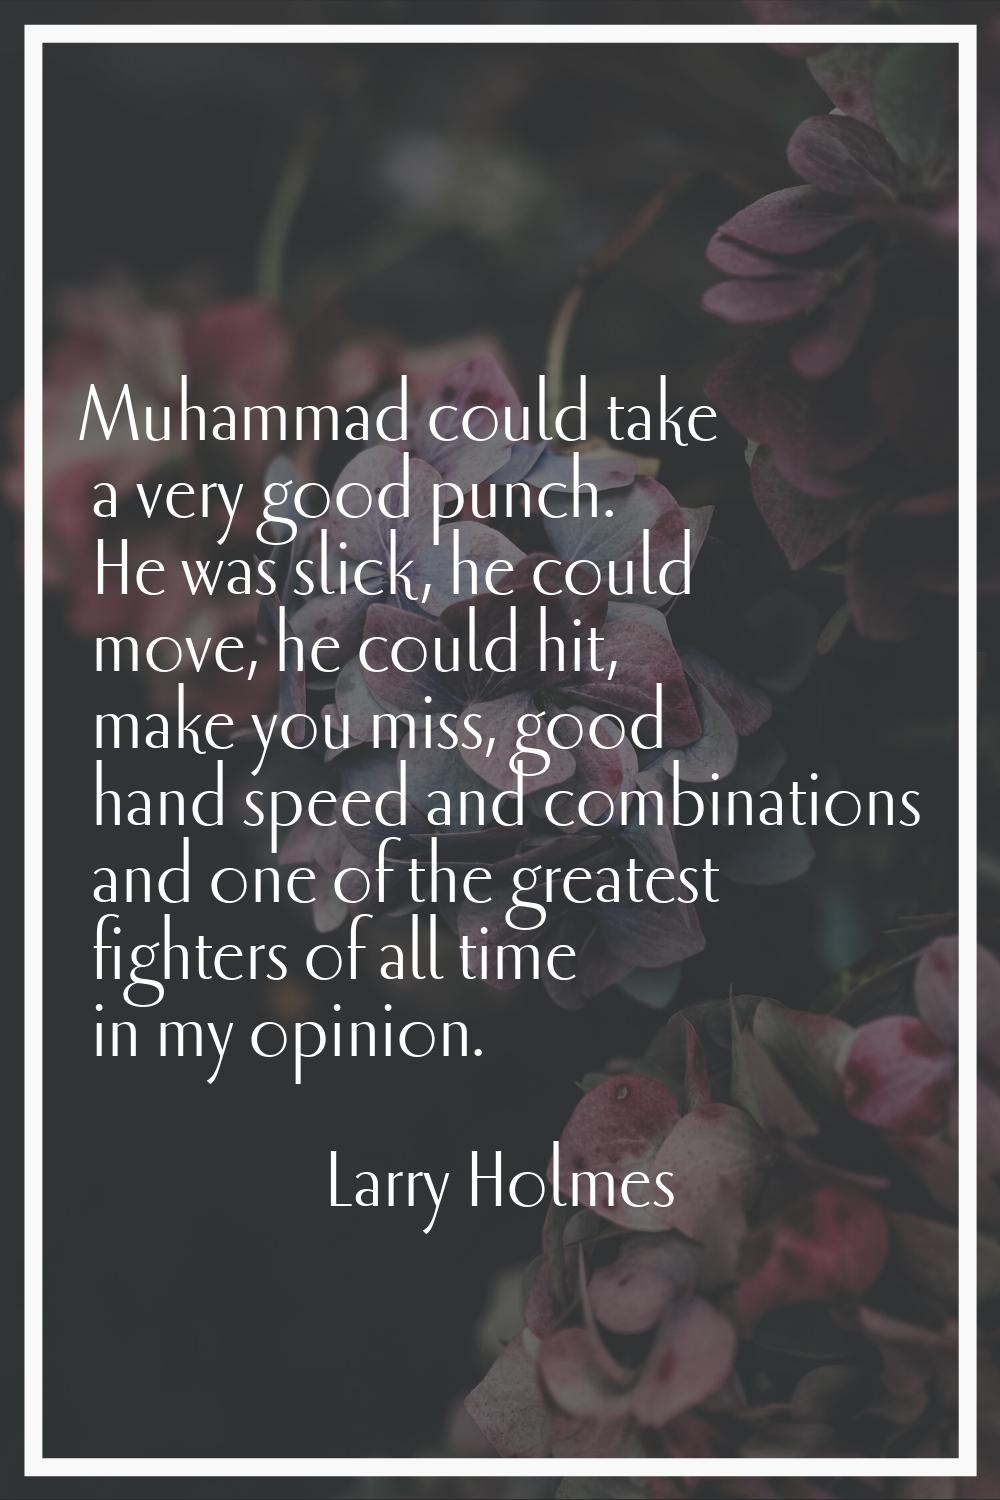 Muhammad could take a very good punch. He was slick, he could move, he could hit, make you miss, go